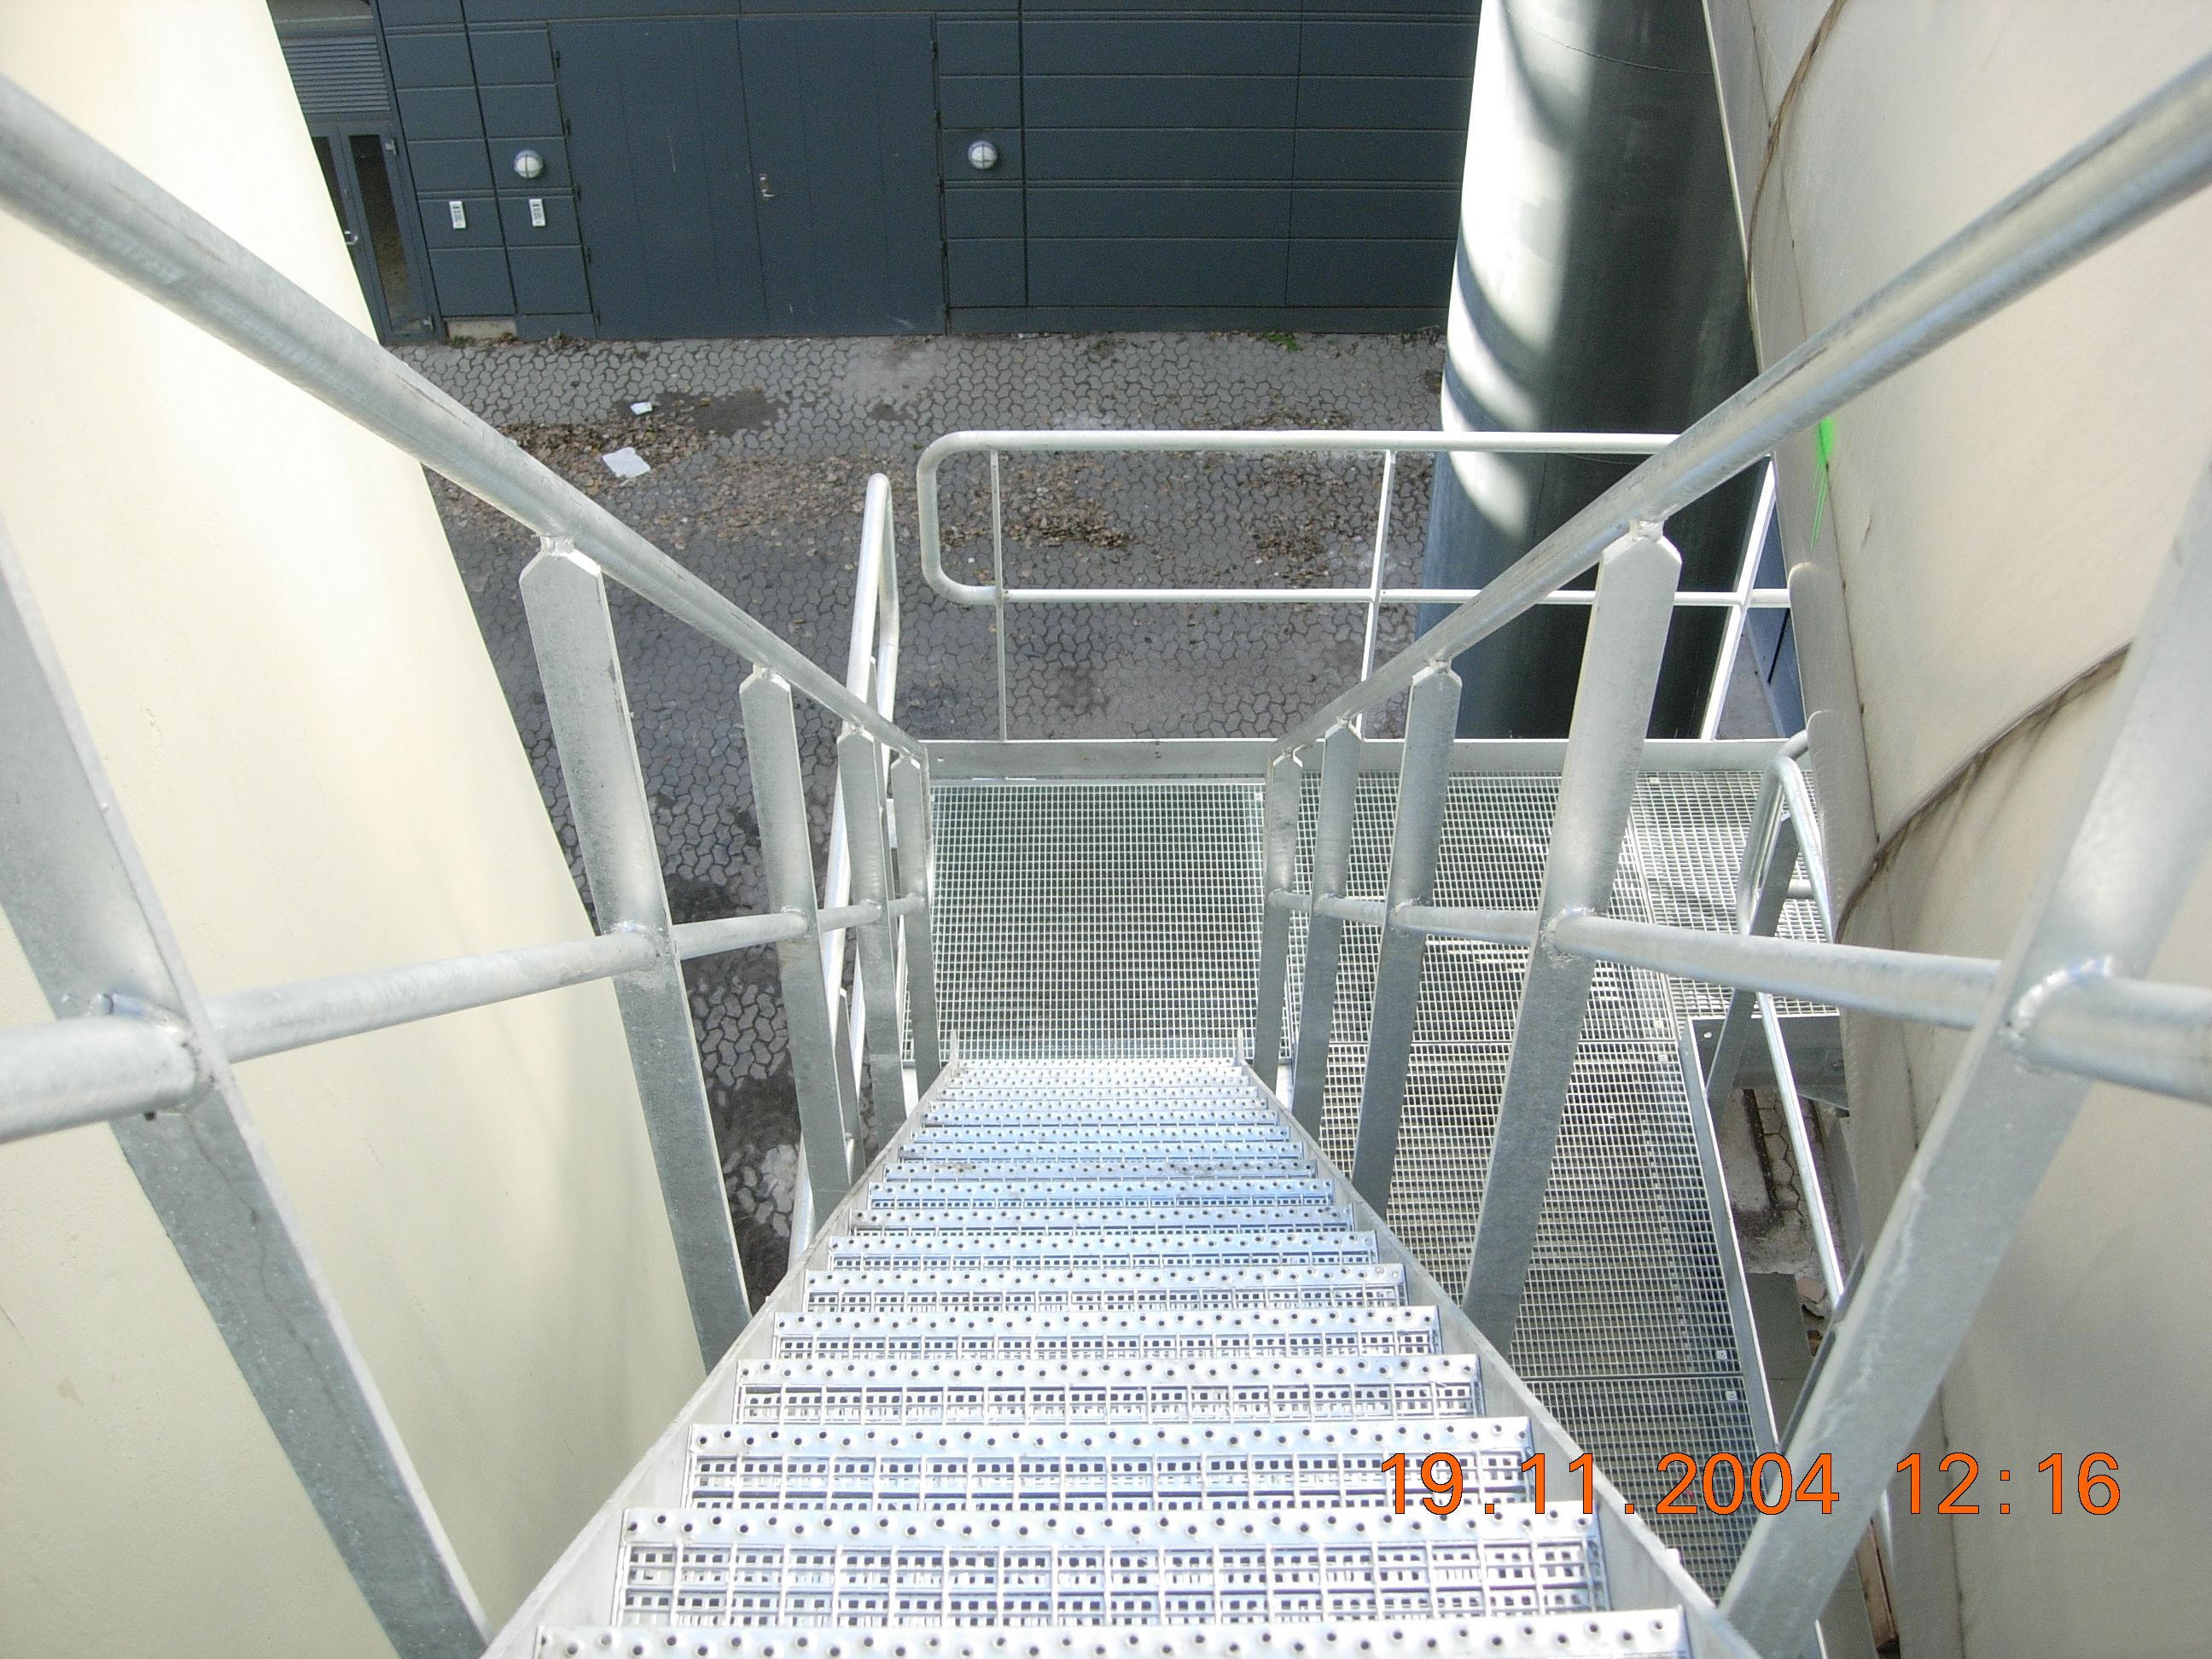 Platform and Access Stairs @ Waste Incineration Plant